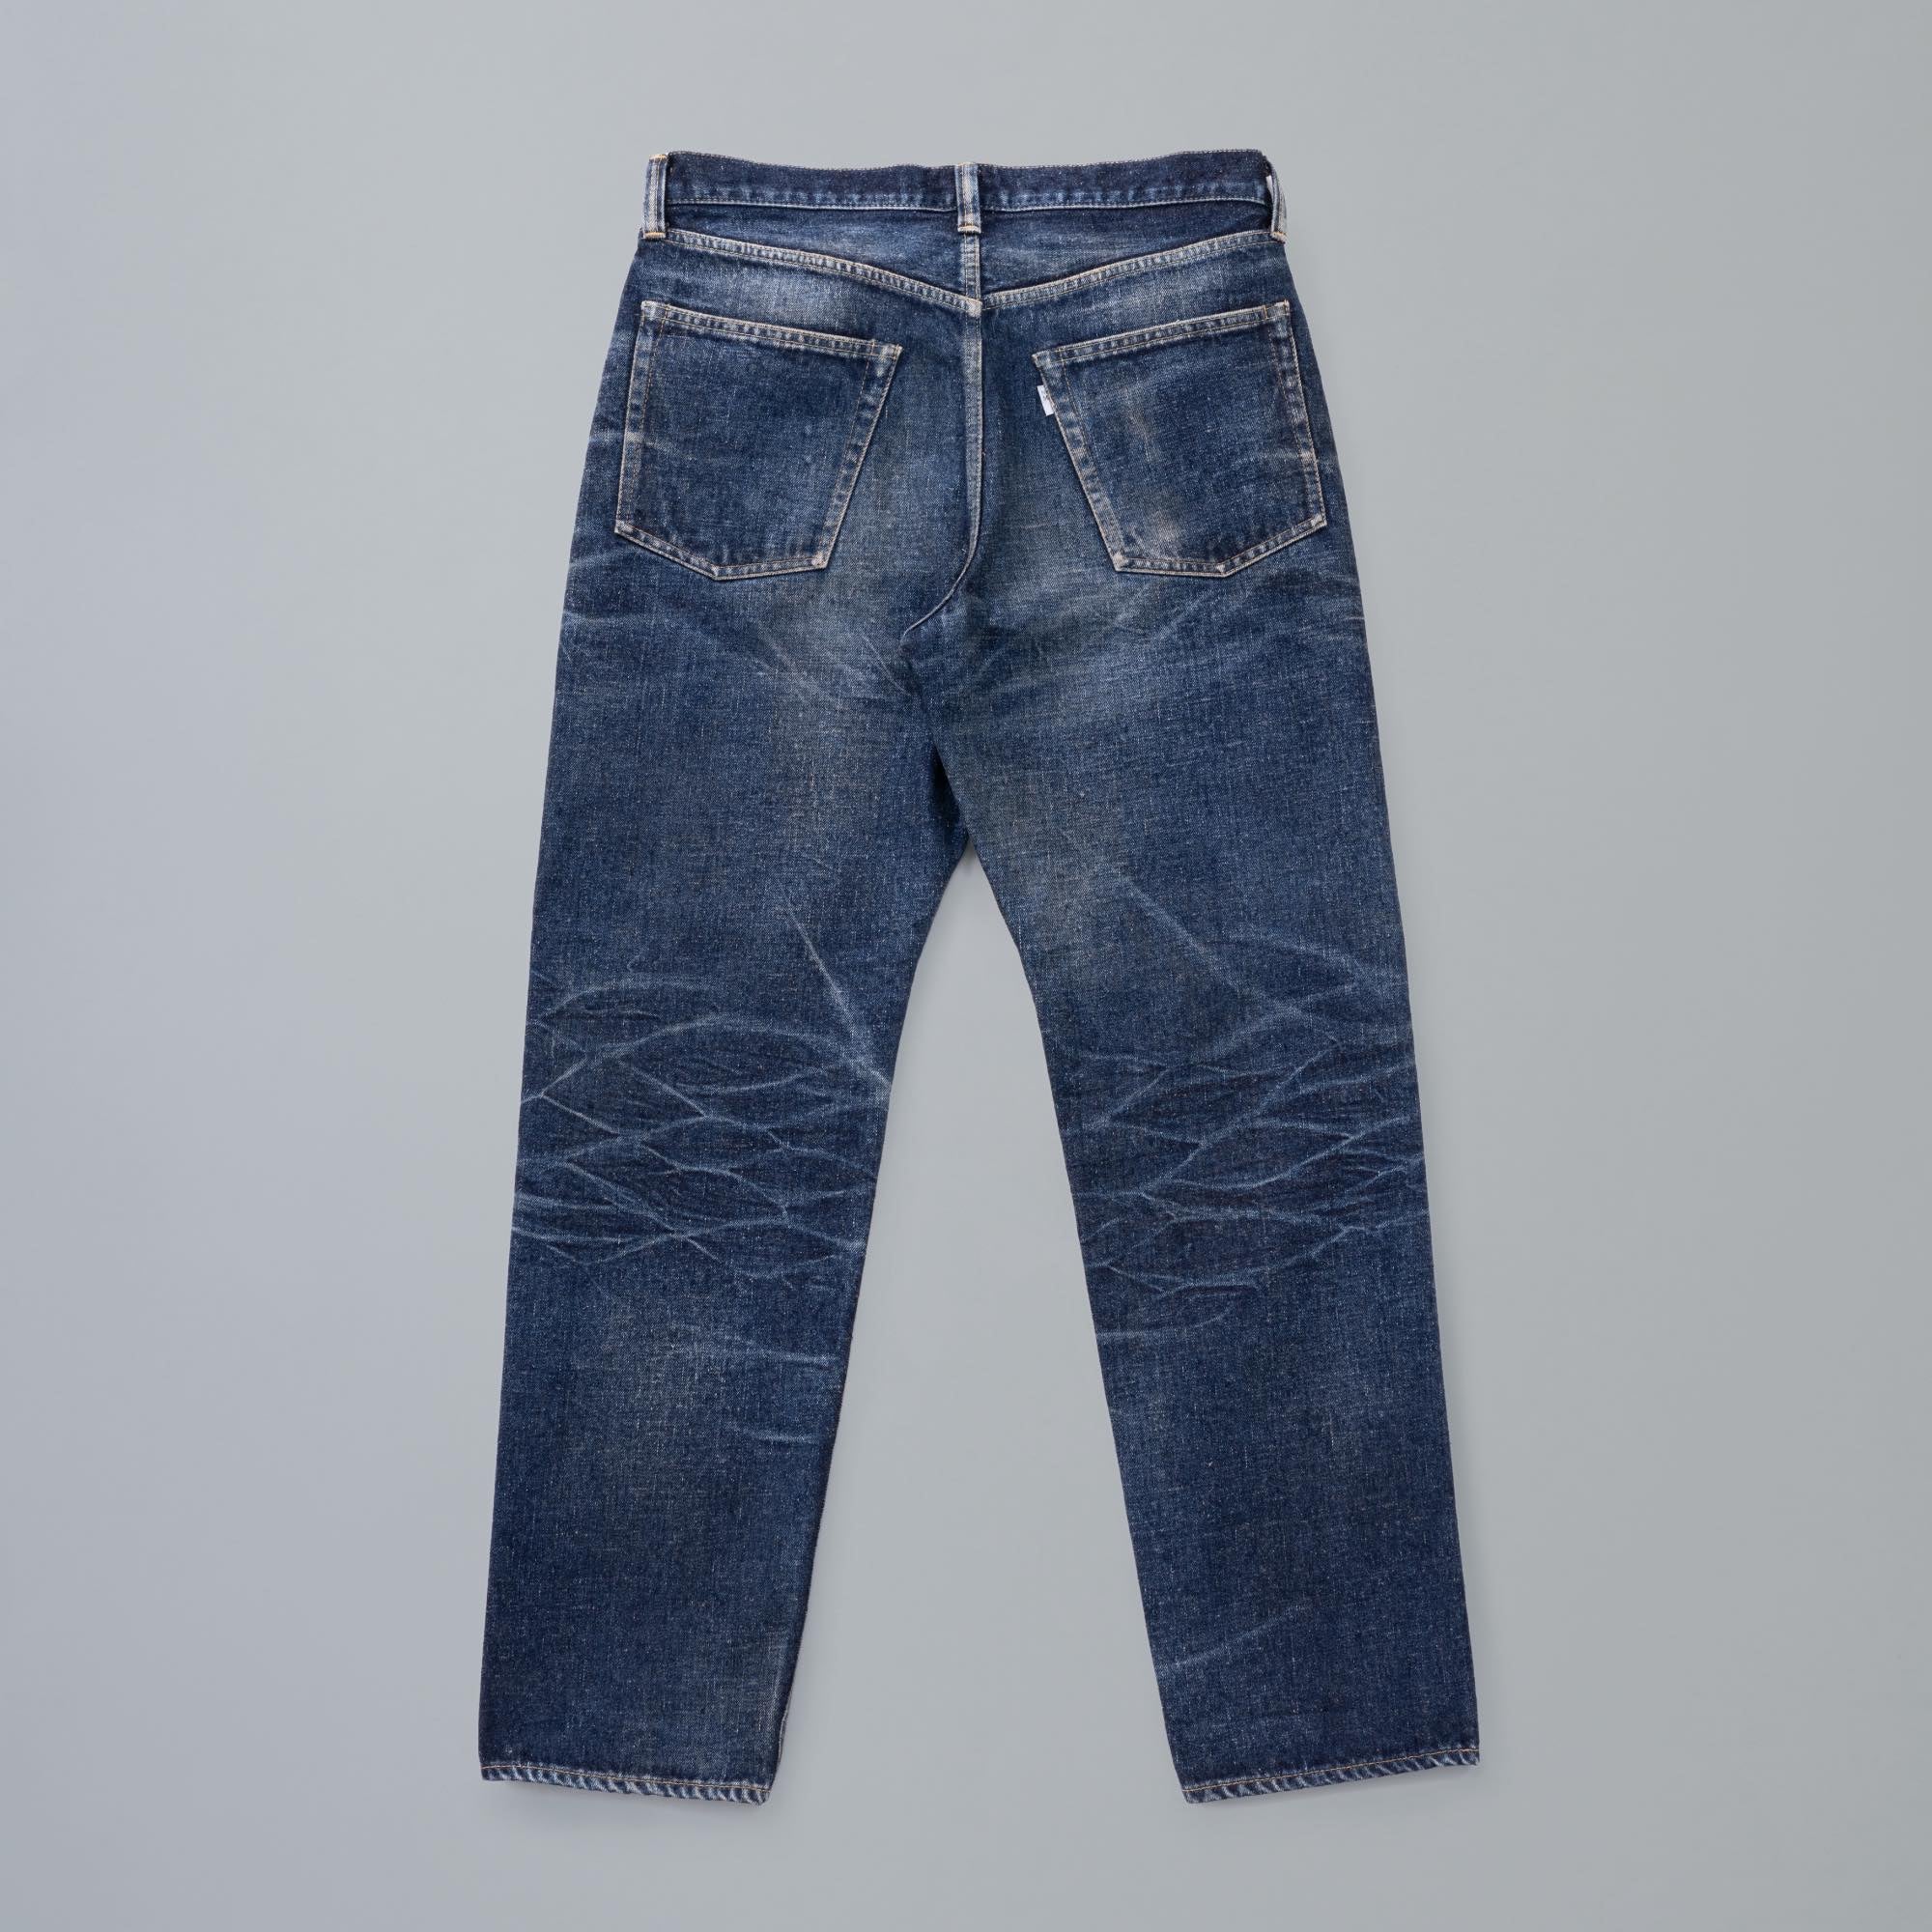 New Manual #017 LV 61's TAPERED JEANS 34